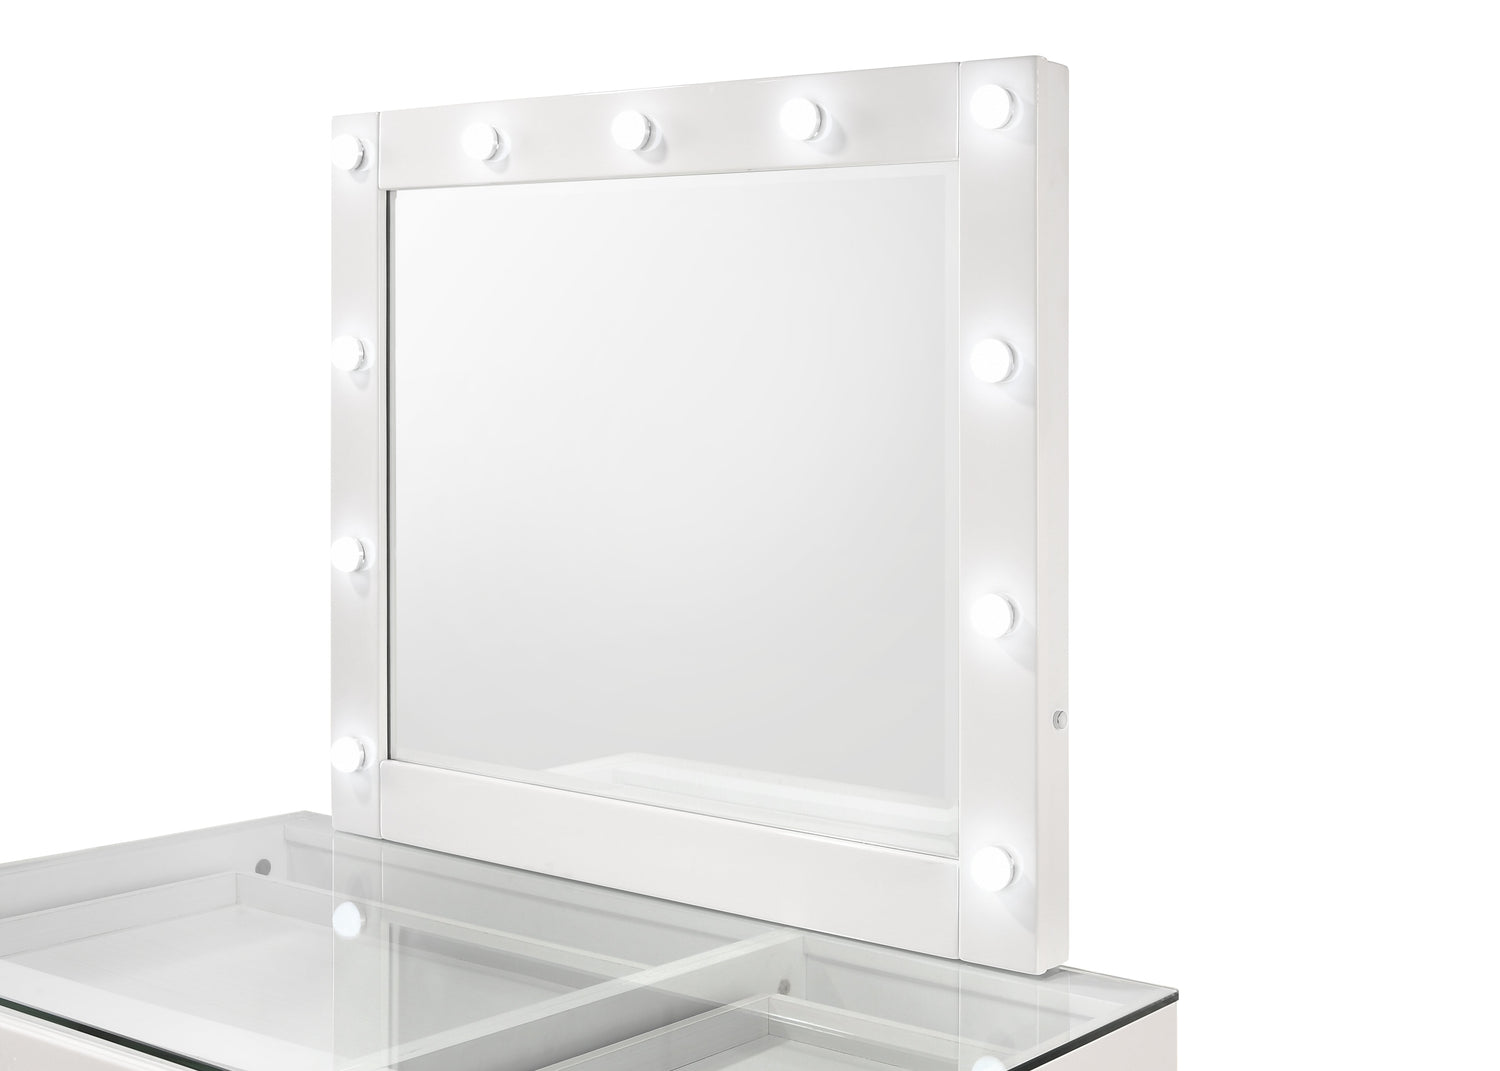 Morgan White Makeup Vanity Set with Lighted Mirror - SET | B4851WH-91-BASE | B4851WH-91-TOP | B4850WH-91-11 - Bien Home Furniture &amp; Electronics